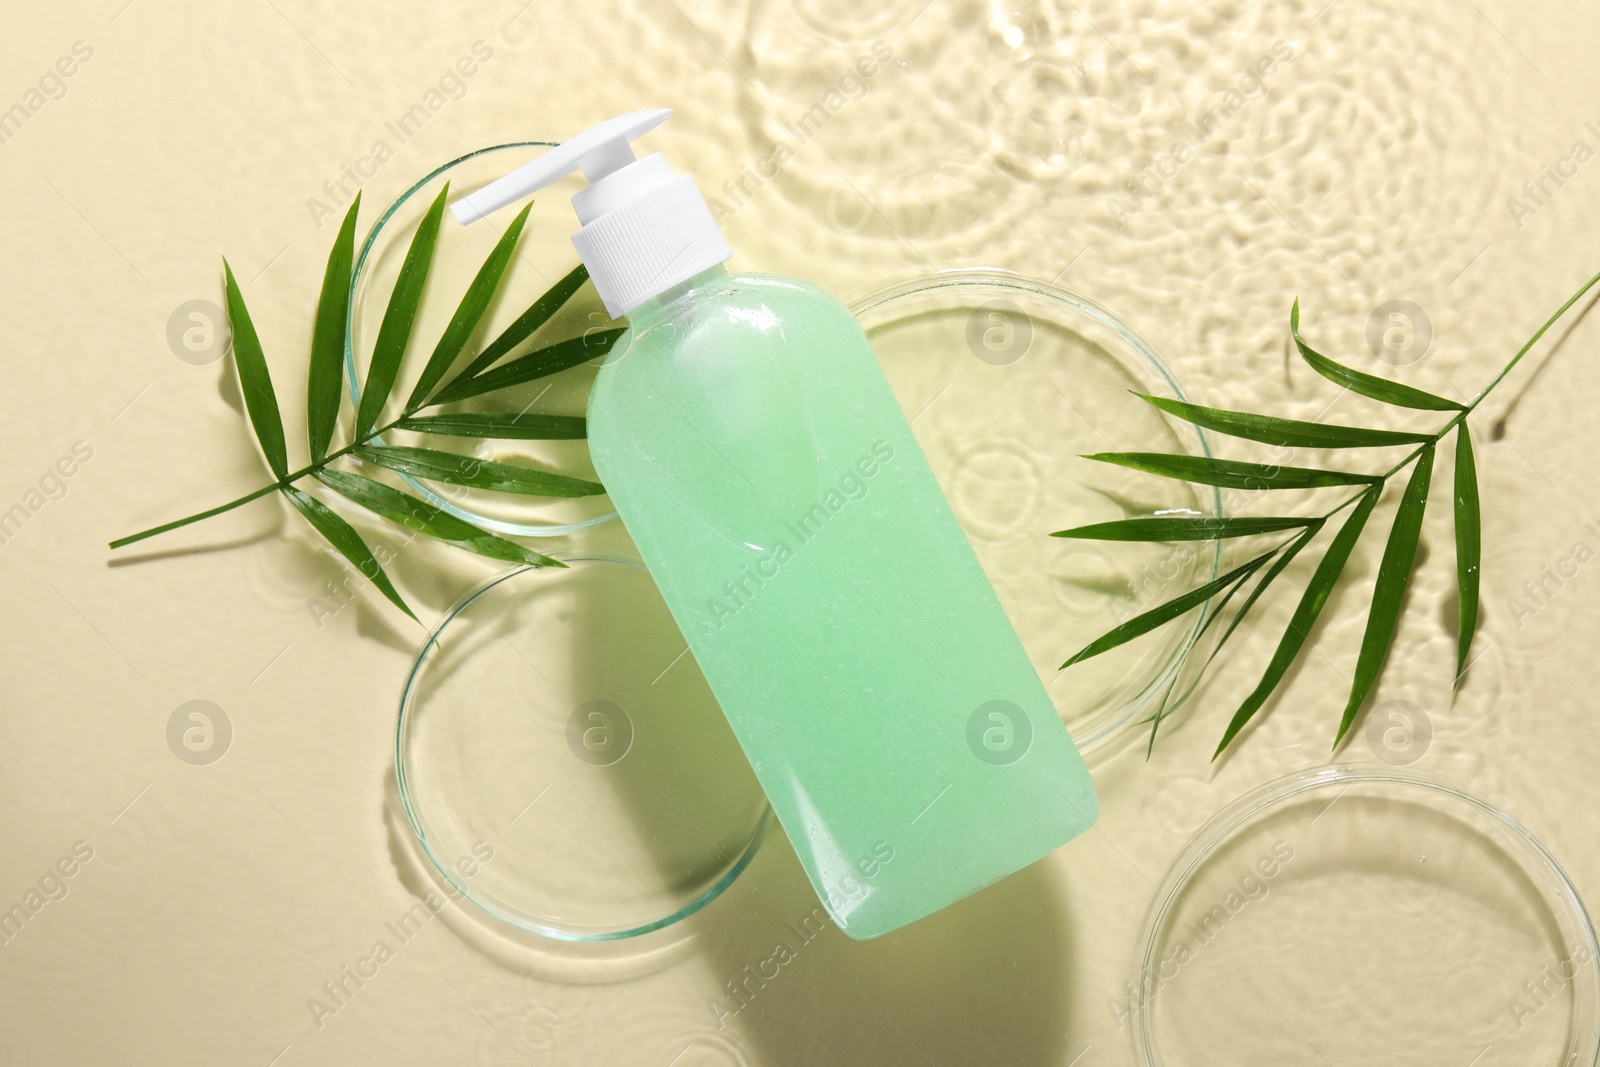 Photo of Bottle of face cleansing product, fresh leaves and petri dishes in water against beige background, flat lay